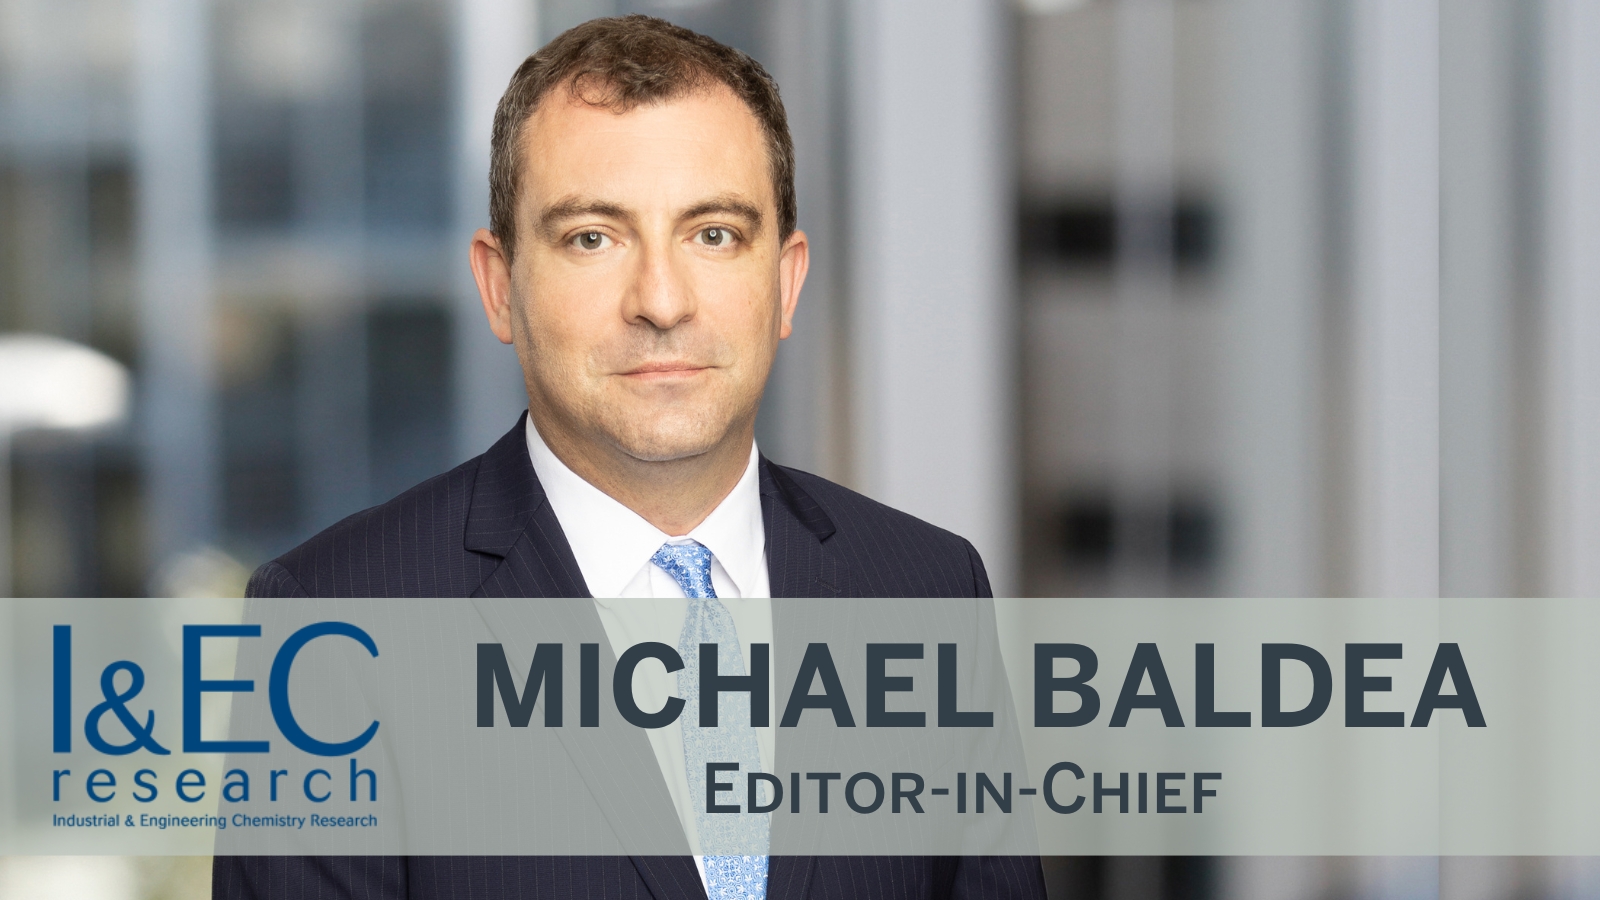 Michael Baldea named Editor-in-Chief at Industrial & Engineering Chemistry Research journal